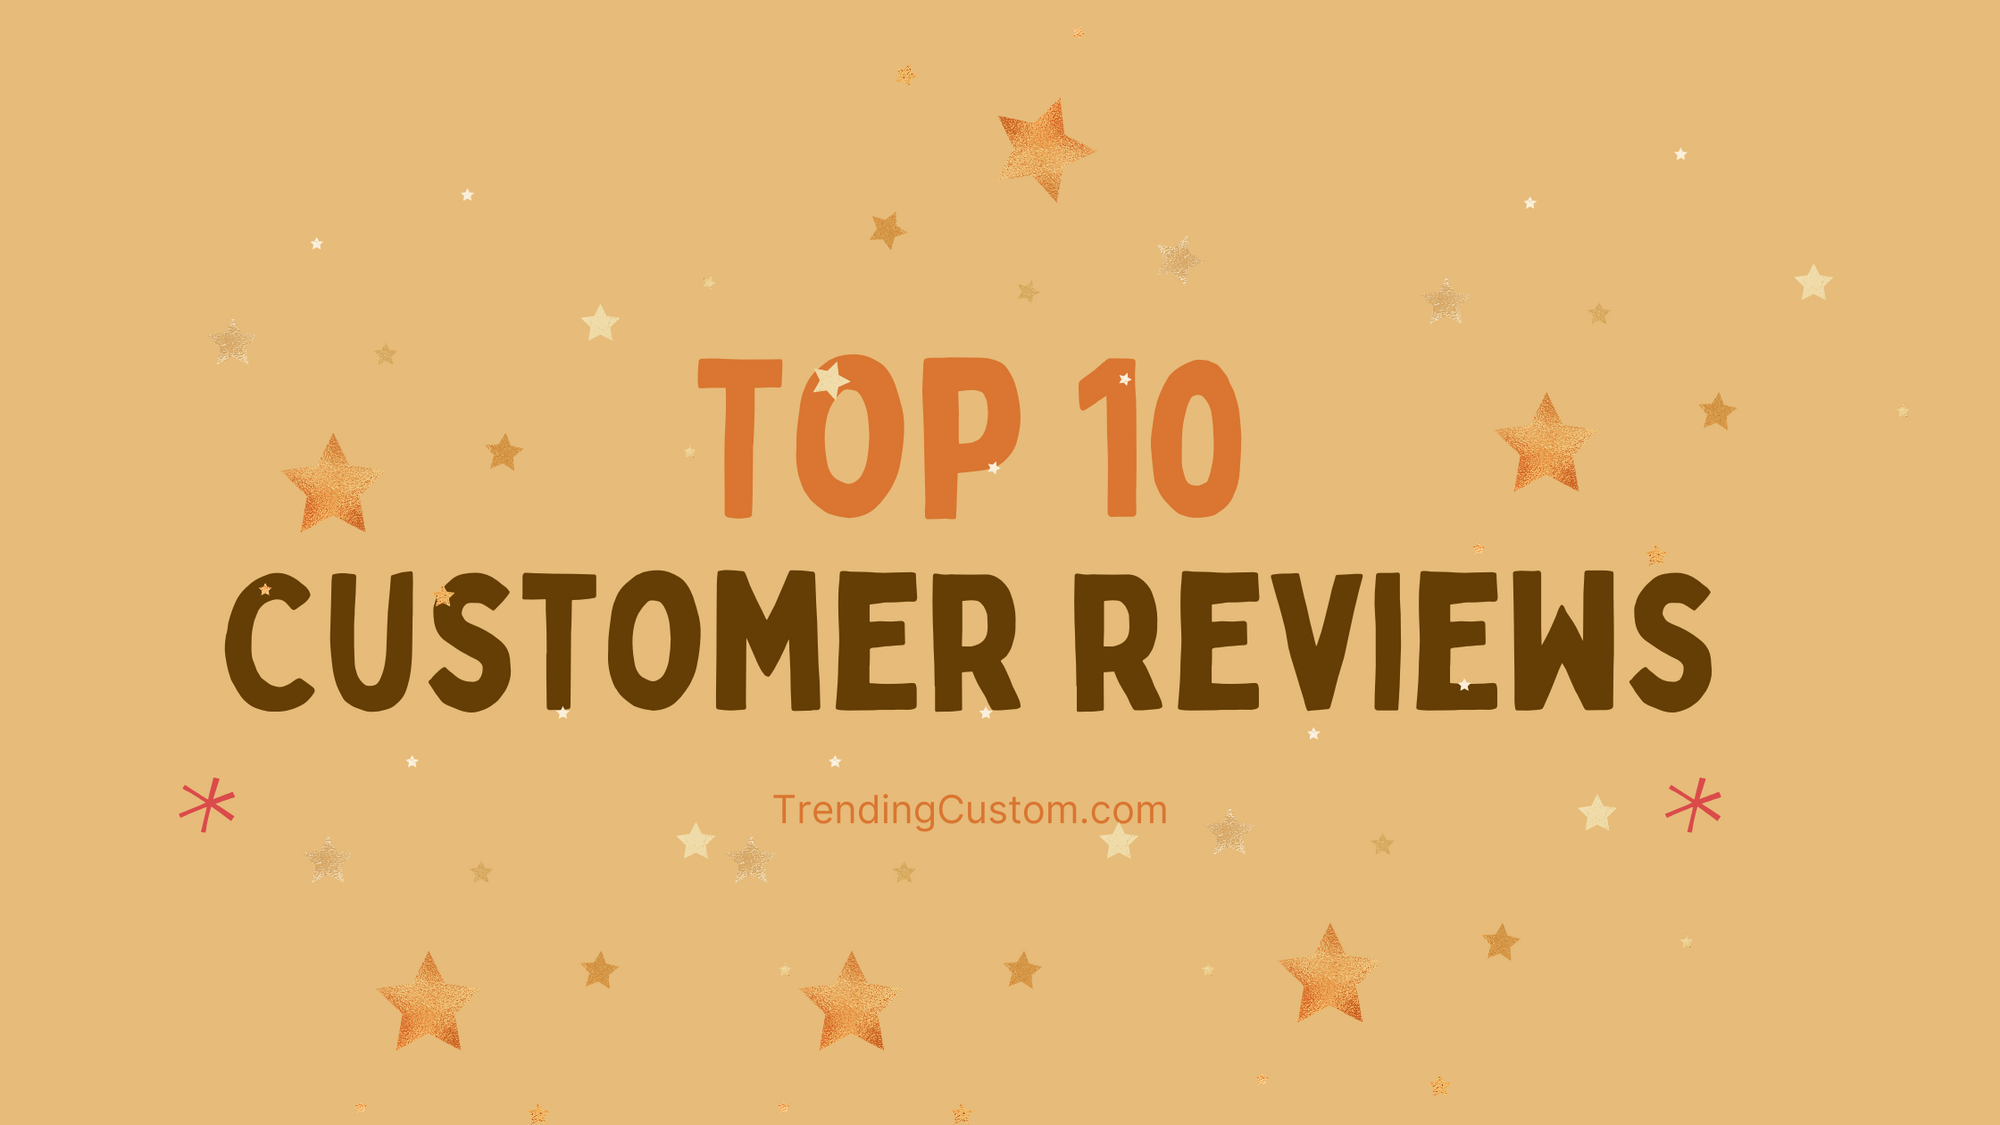 Top 10 Raving Reviews: Our Customers Speak Out! - January 21st